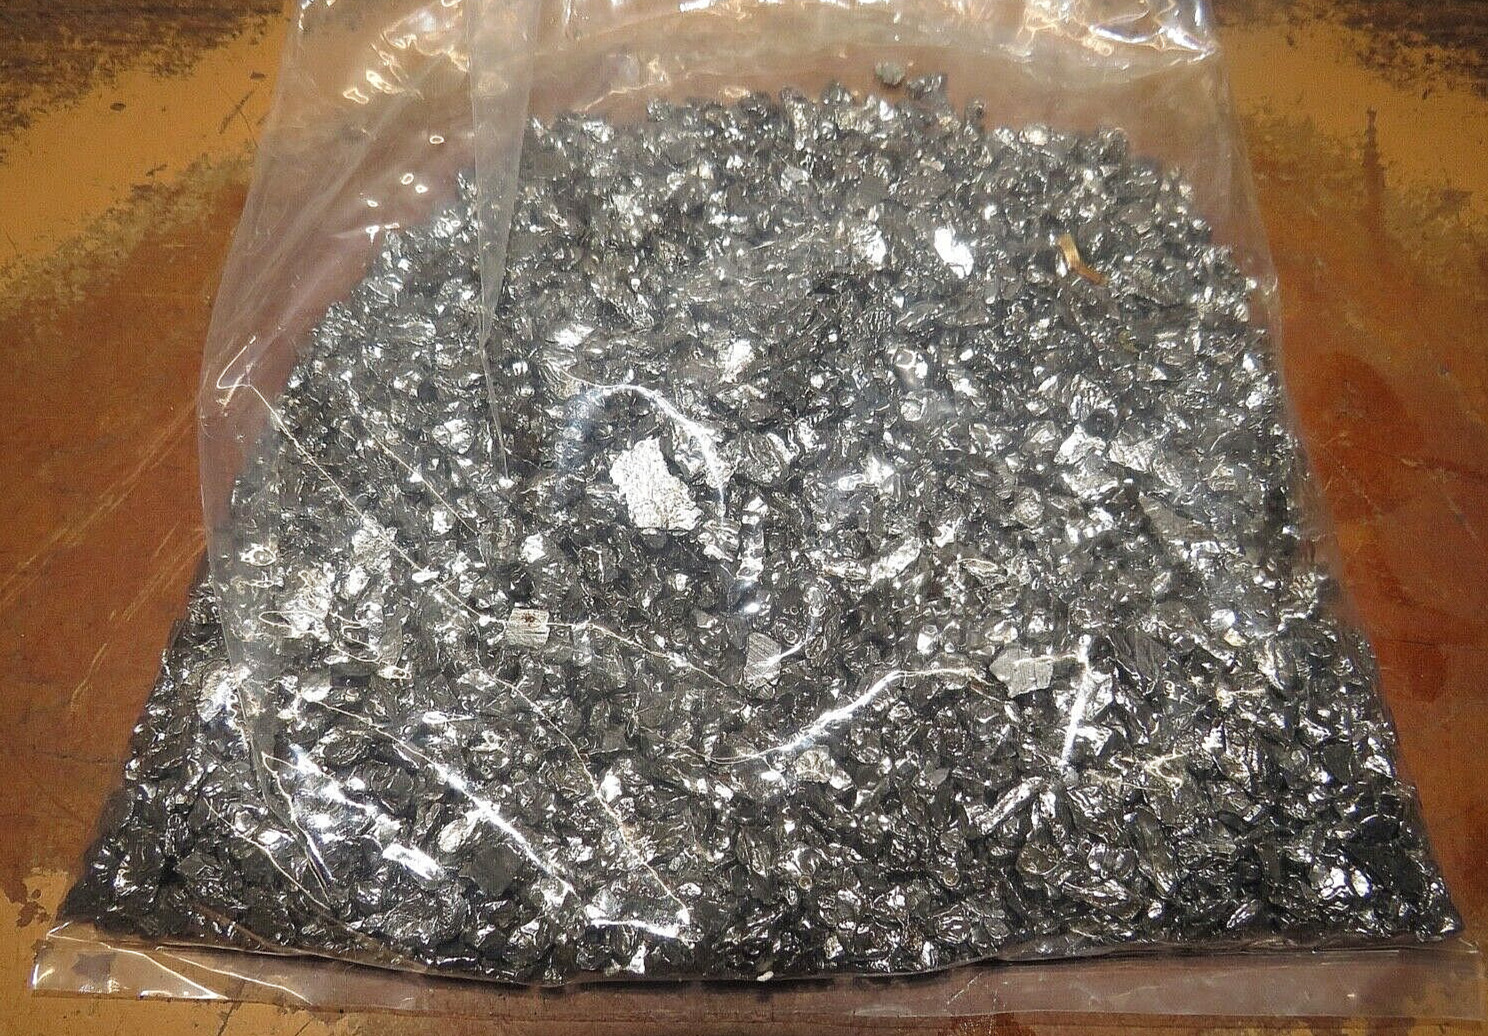 1000 gm LOT OF  CAMPO DEL CIELO METEORITE CRYSTALS 0-1 GMS IN SIZE LOWEST PRICE